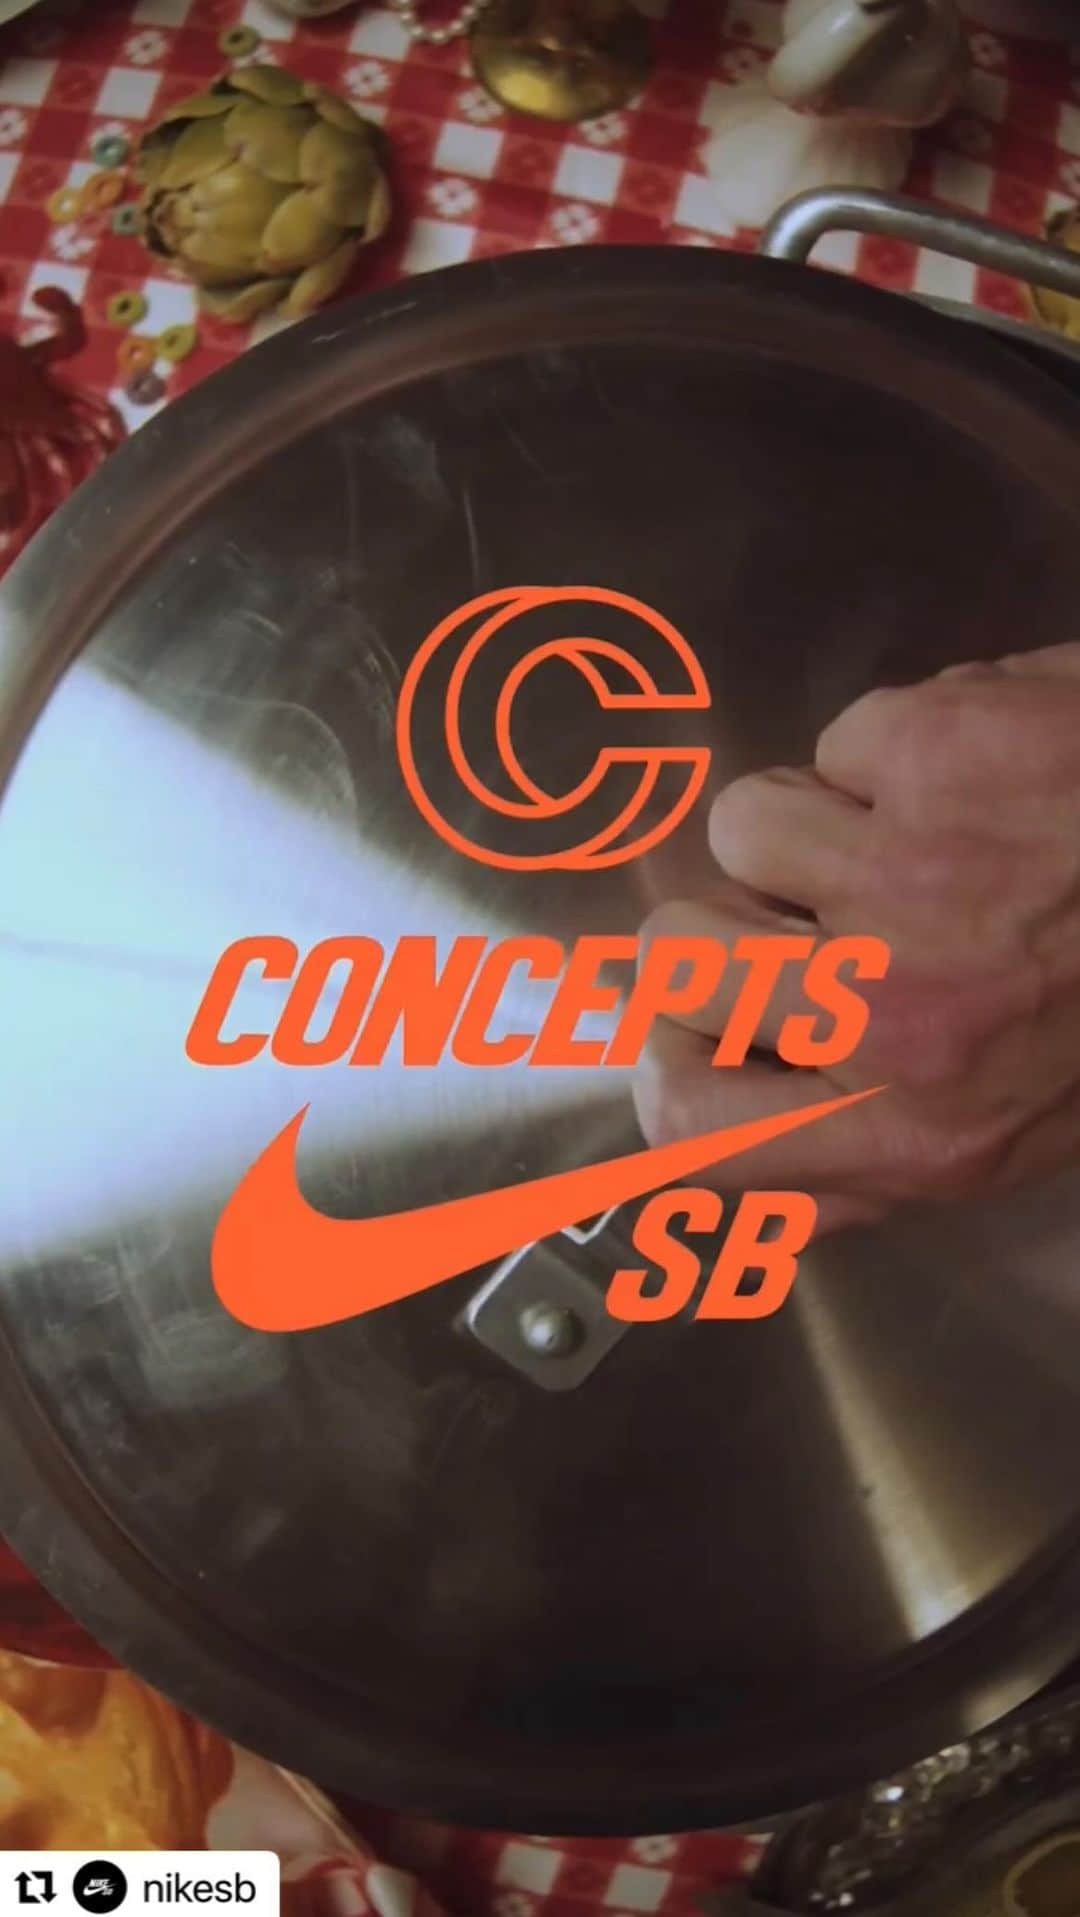 Kento Utsuboのインスタグラム：「NIKE SB X CONCEPTS @nikesb X @cncpts  Theatre of Curiosity  🍽 @antoniodurao @carolinavmarie @rahellabella @robheppler @daddydoitall @oketoburks @bwiz @http.dugan.mp3  Repost _ _ _ _ _ _ I was really glad to join the special shoot✨📸 Please leave a like and comments below!!!❤️‍🔥 Any questions are welcome!!  今回NIKE X CONCEPTSの撮影に参加させて頂きましたー！ スニーカーを愛用しているのでかなり嬉しいコラボです！ありがとうございました☺️ 皆さんの感想・コメントお待ちしてます🎶 質問もお気軽にどうぞ😆」